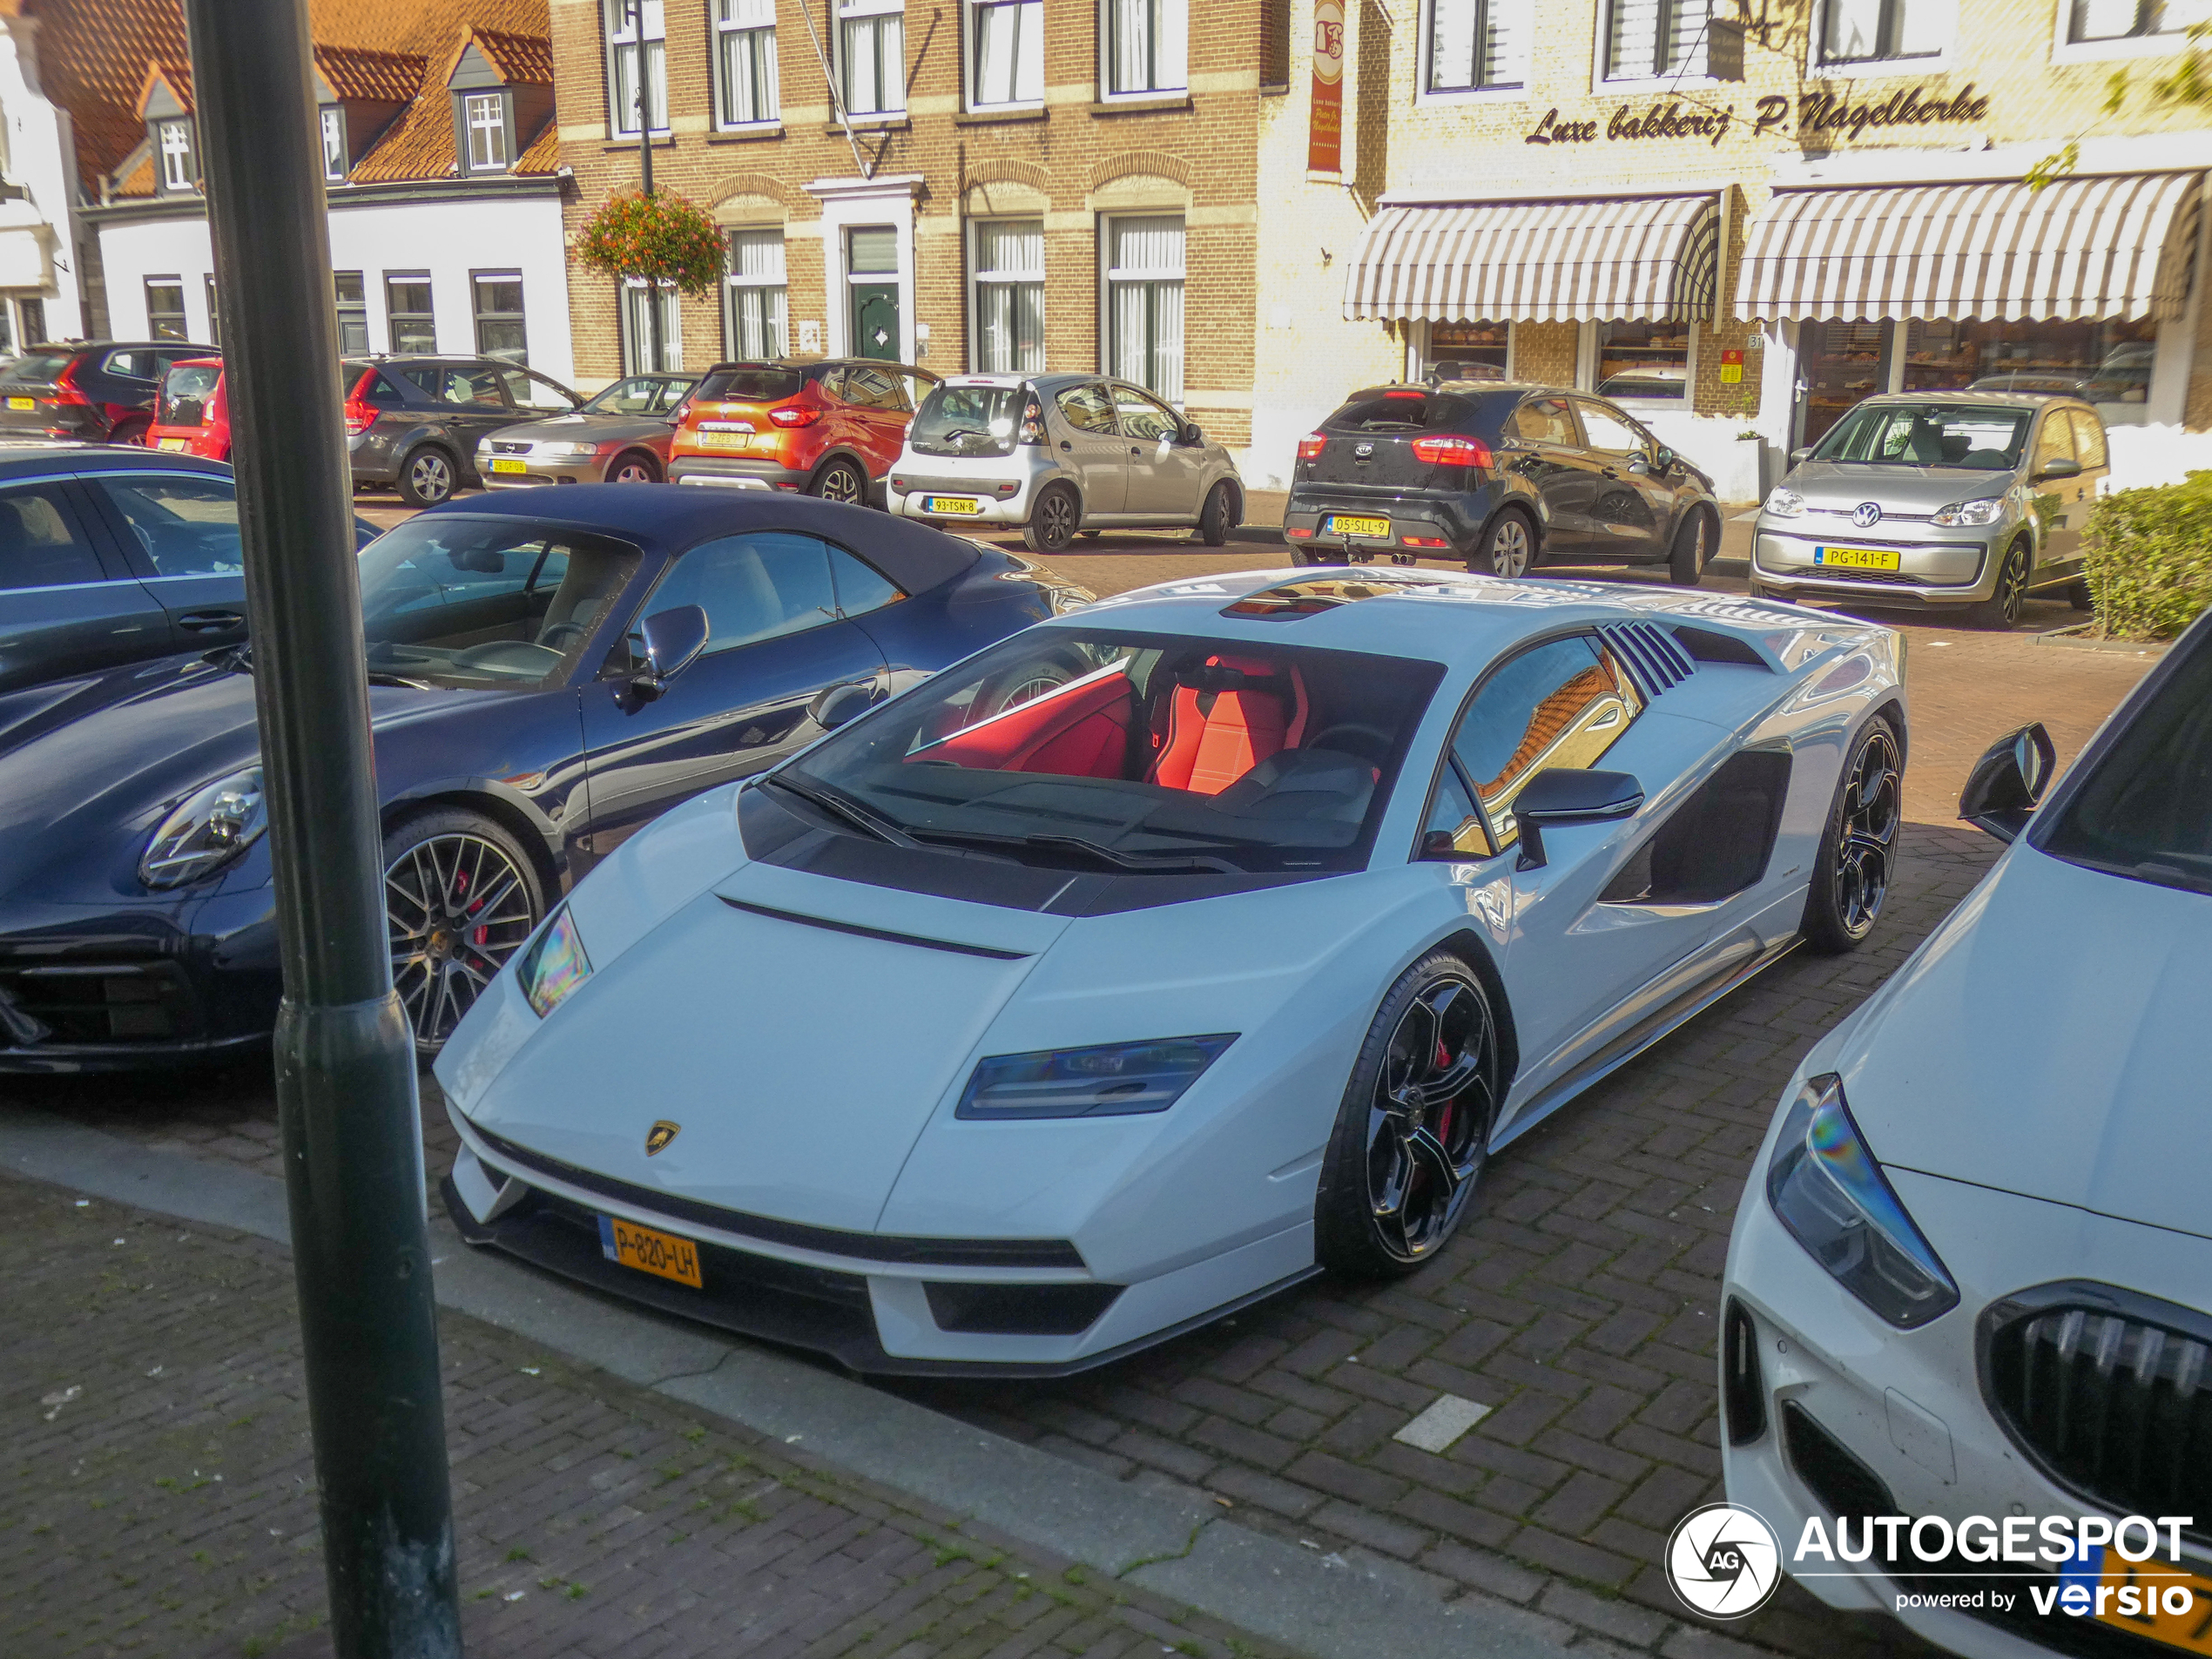 For the very first time we see a Lamborghini Countach LPI 800-4 in the Netherlands